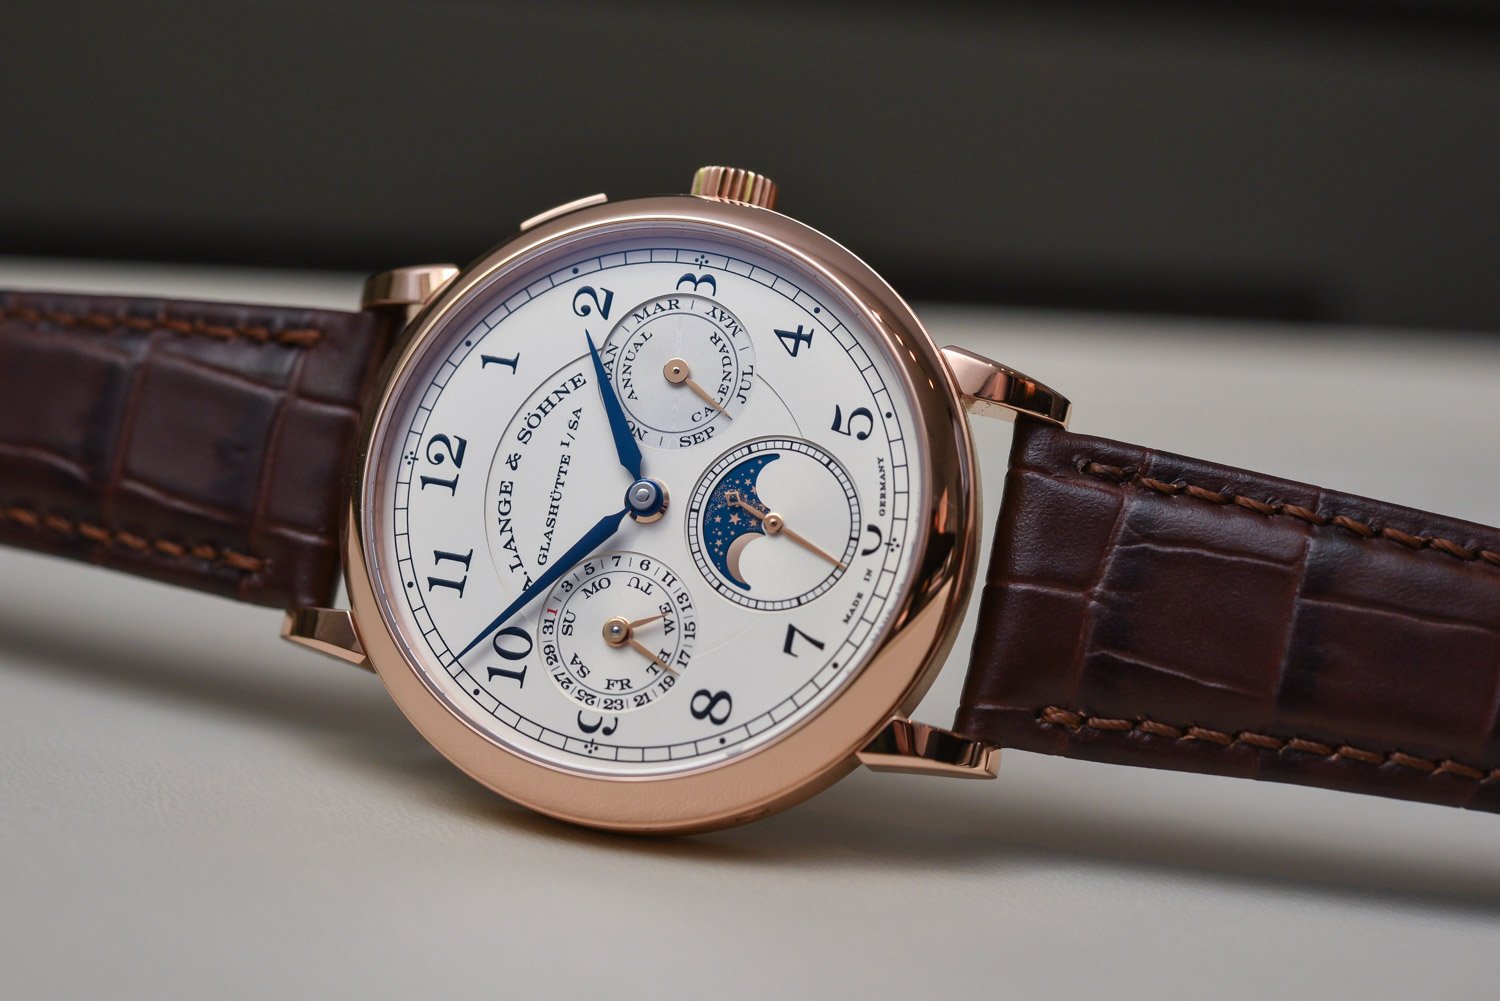 Introducing A. Lange & Sohne Saxonia Thin 37mm Germany's perfect